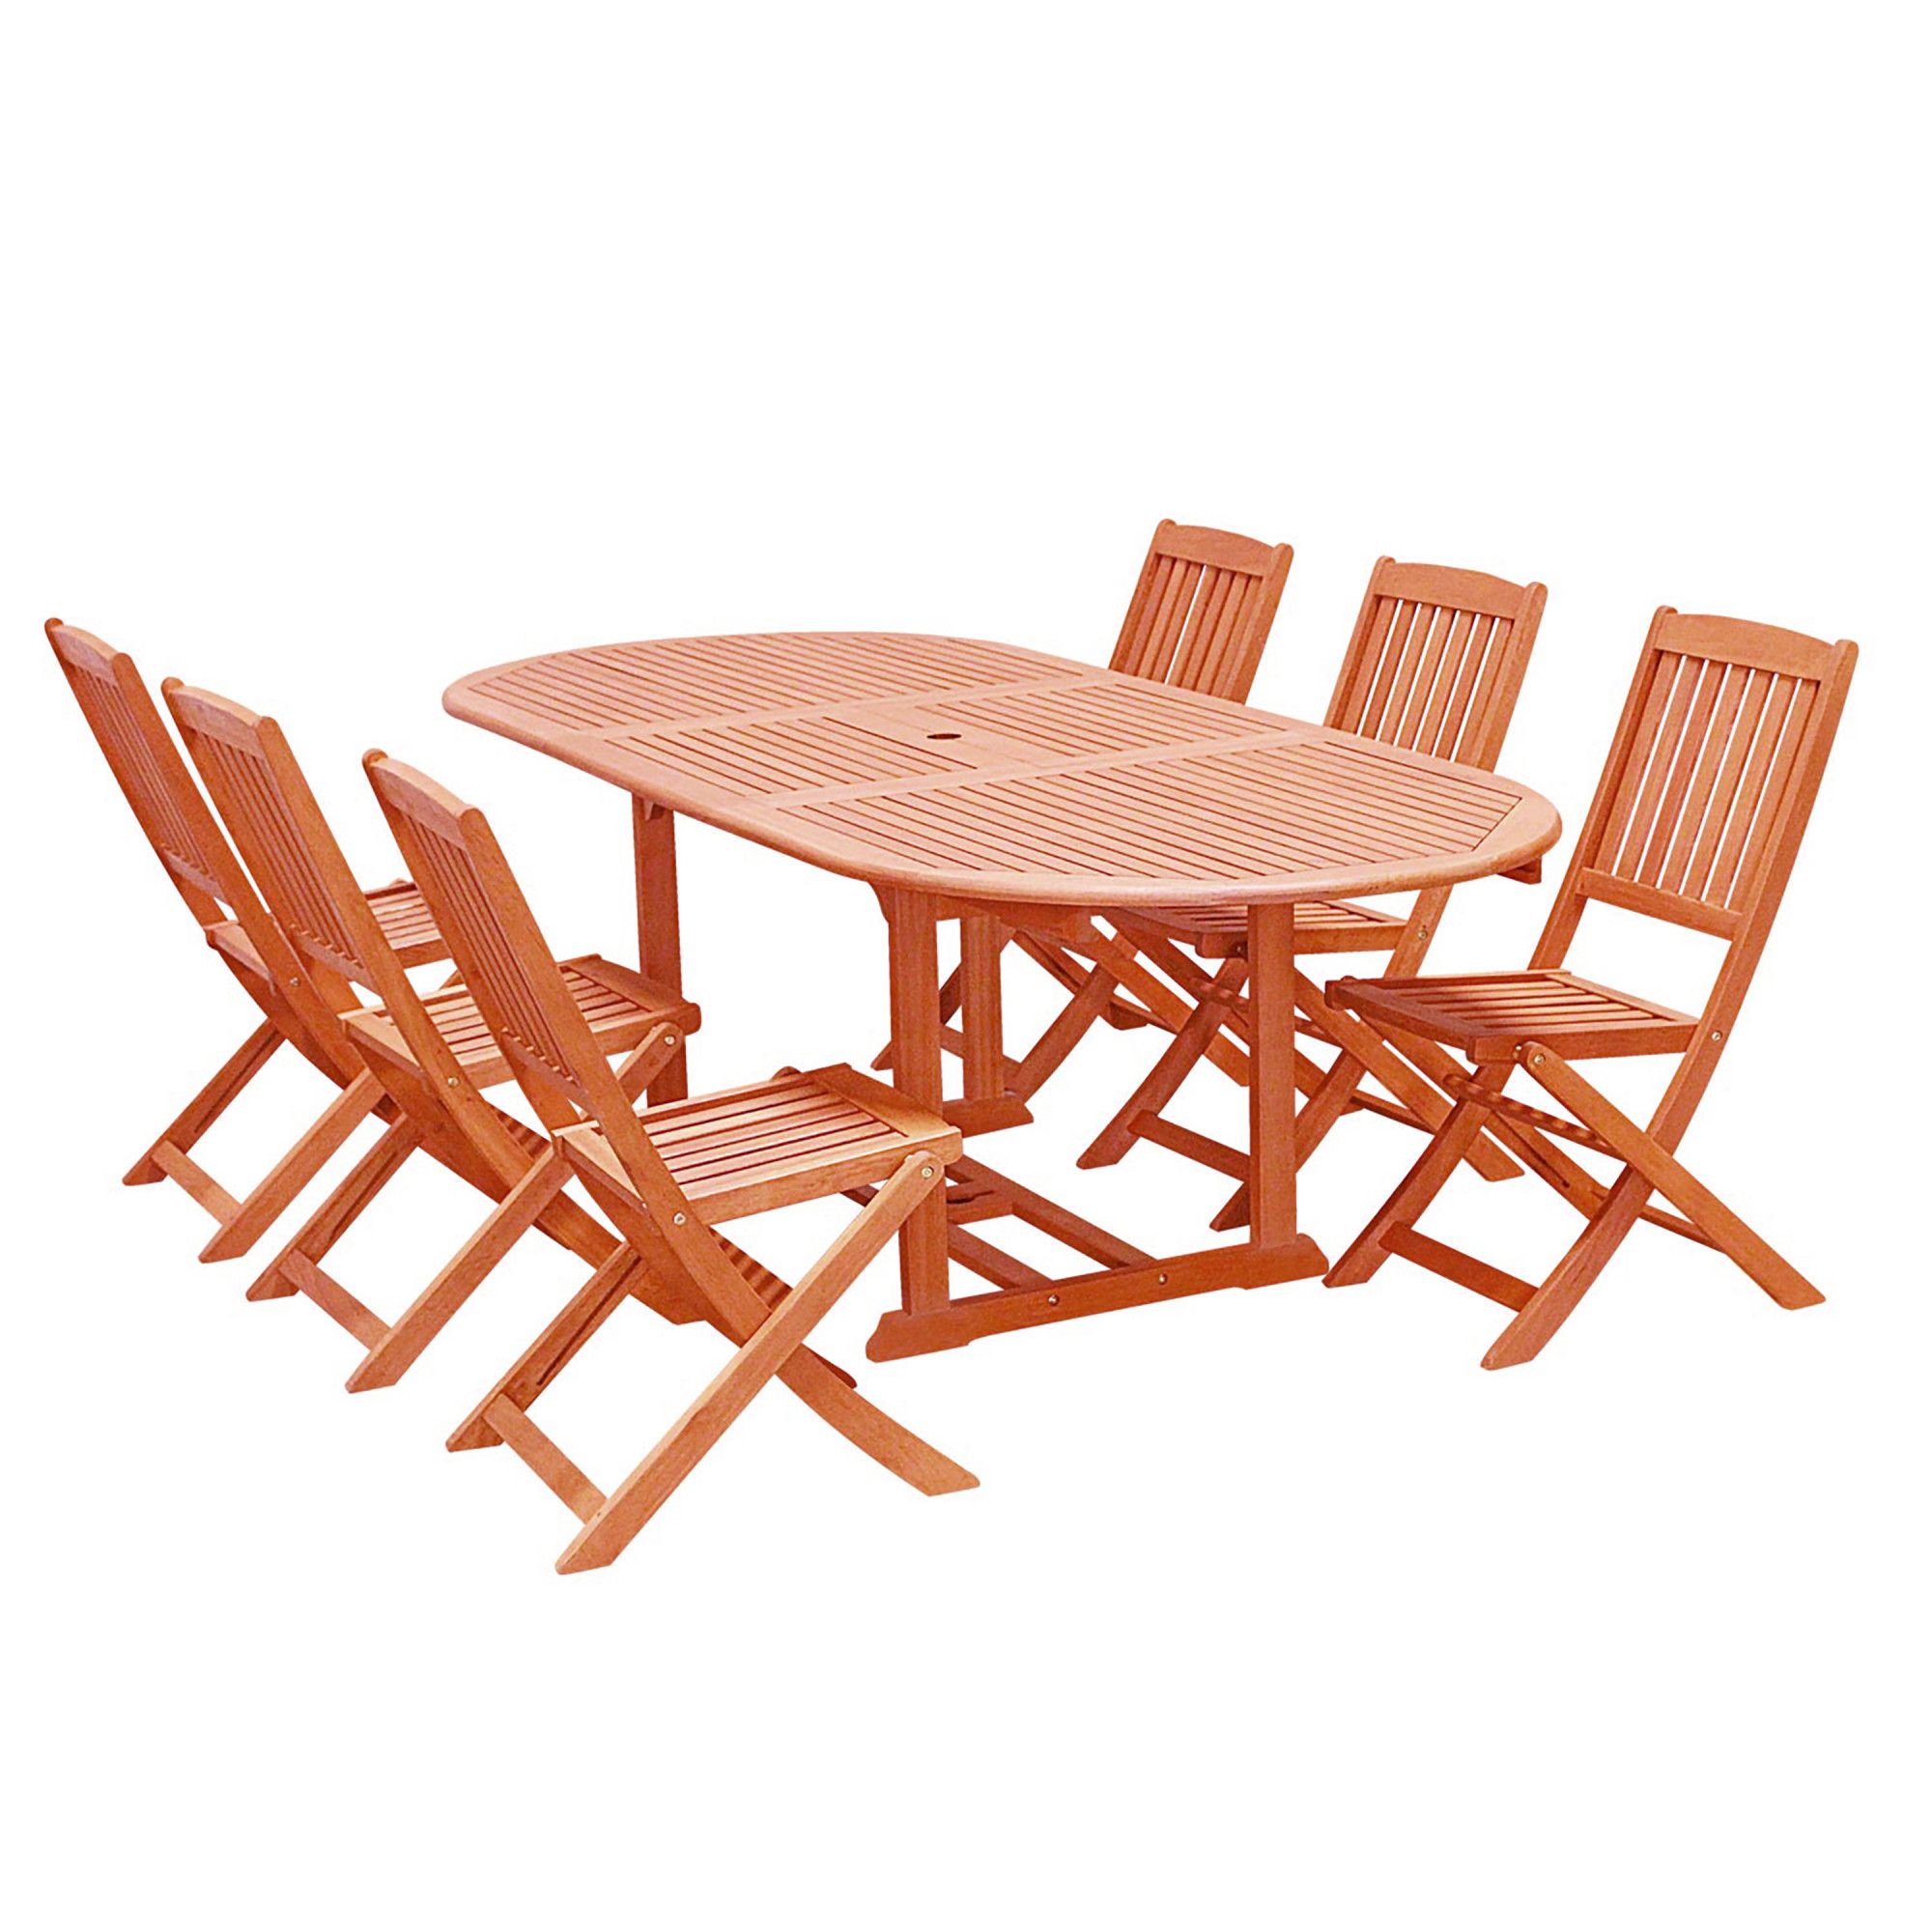 Fashionable Extendable 7 Piece Patio Dining Sets Within Malibu Outdoor 7 Piece Wood Patio Dining Set With Extension Table (View 9 of 15)